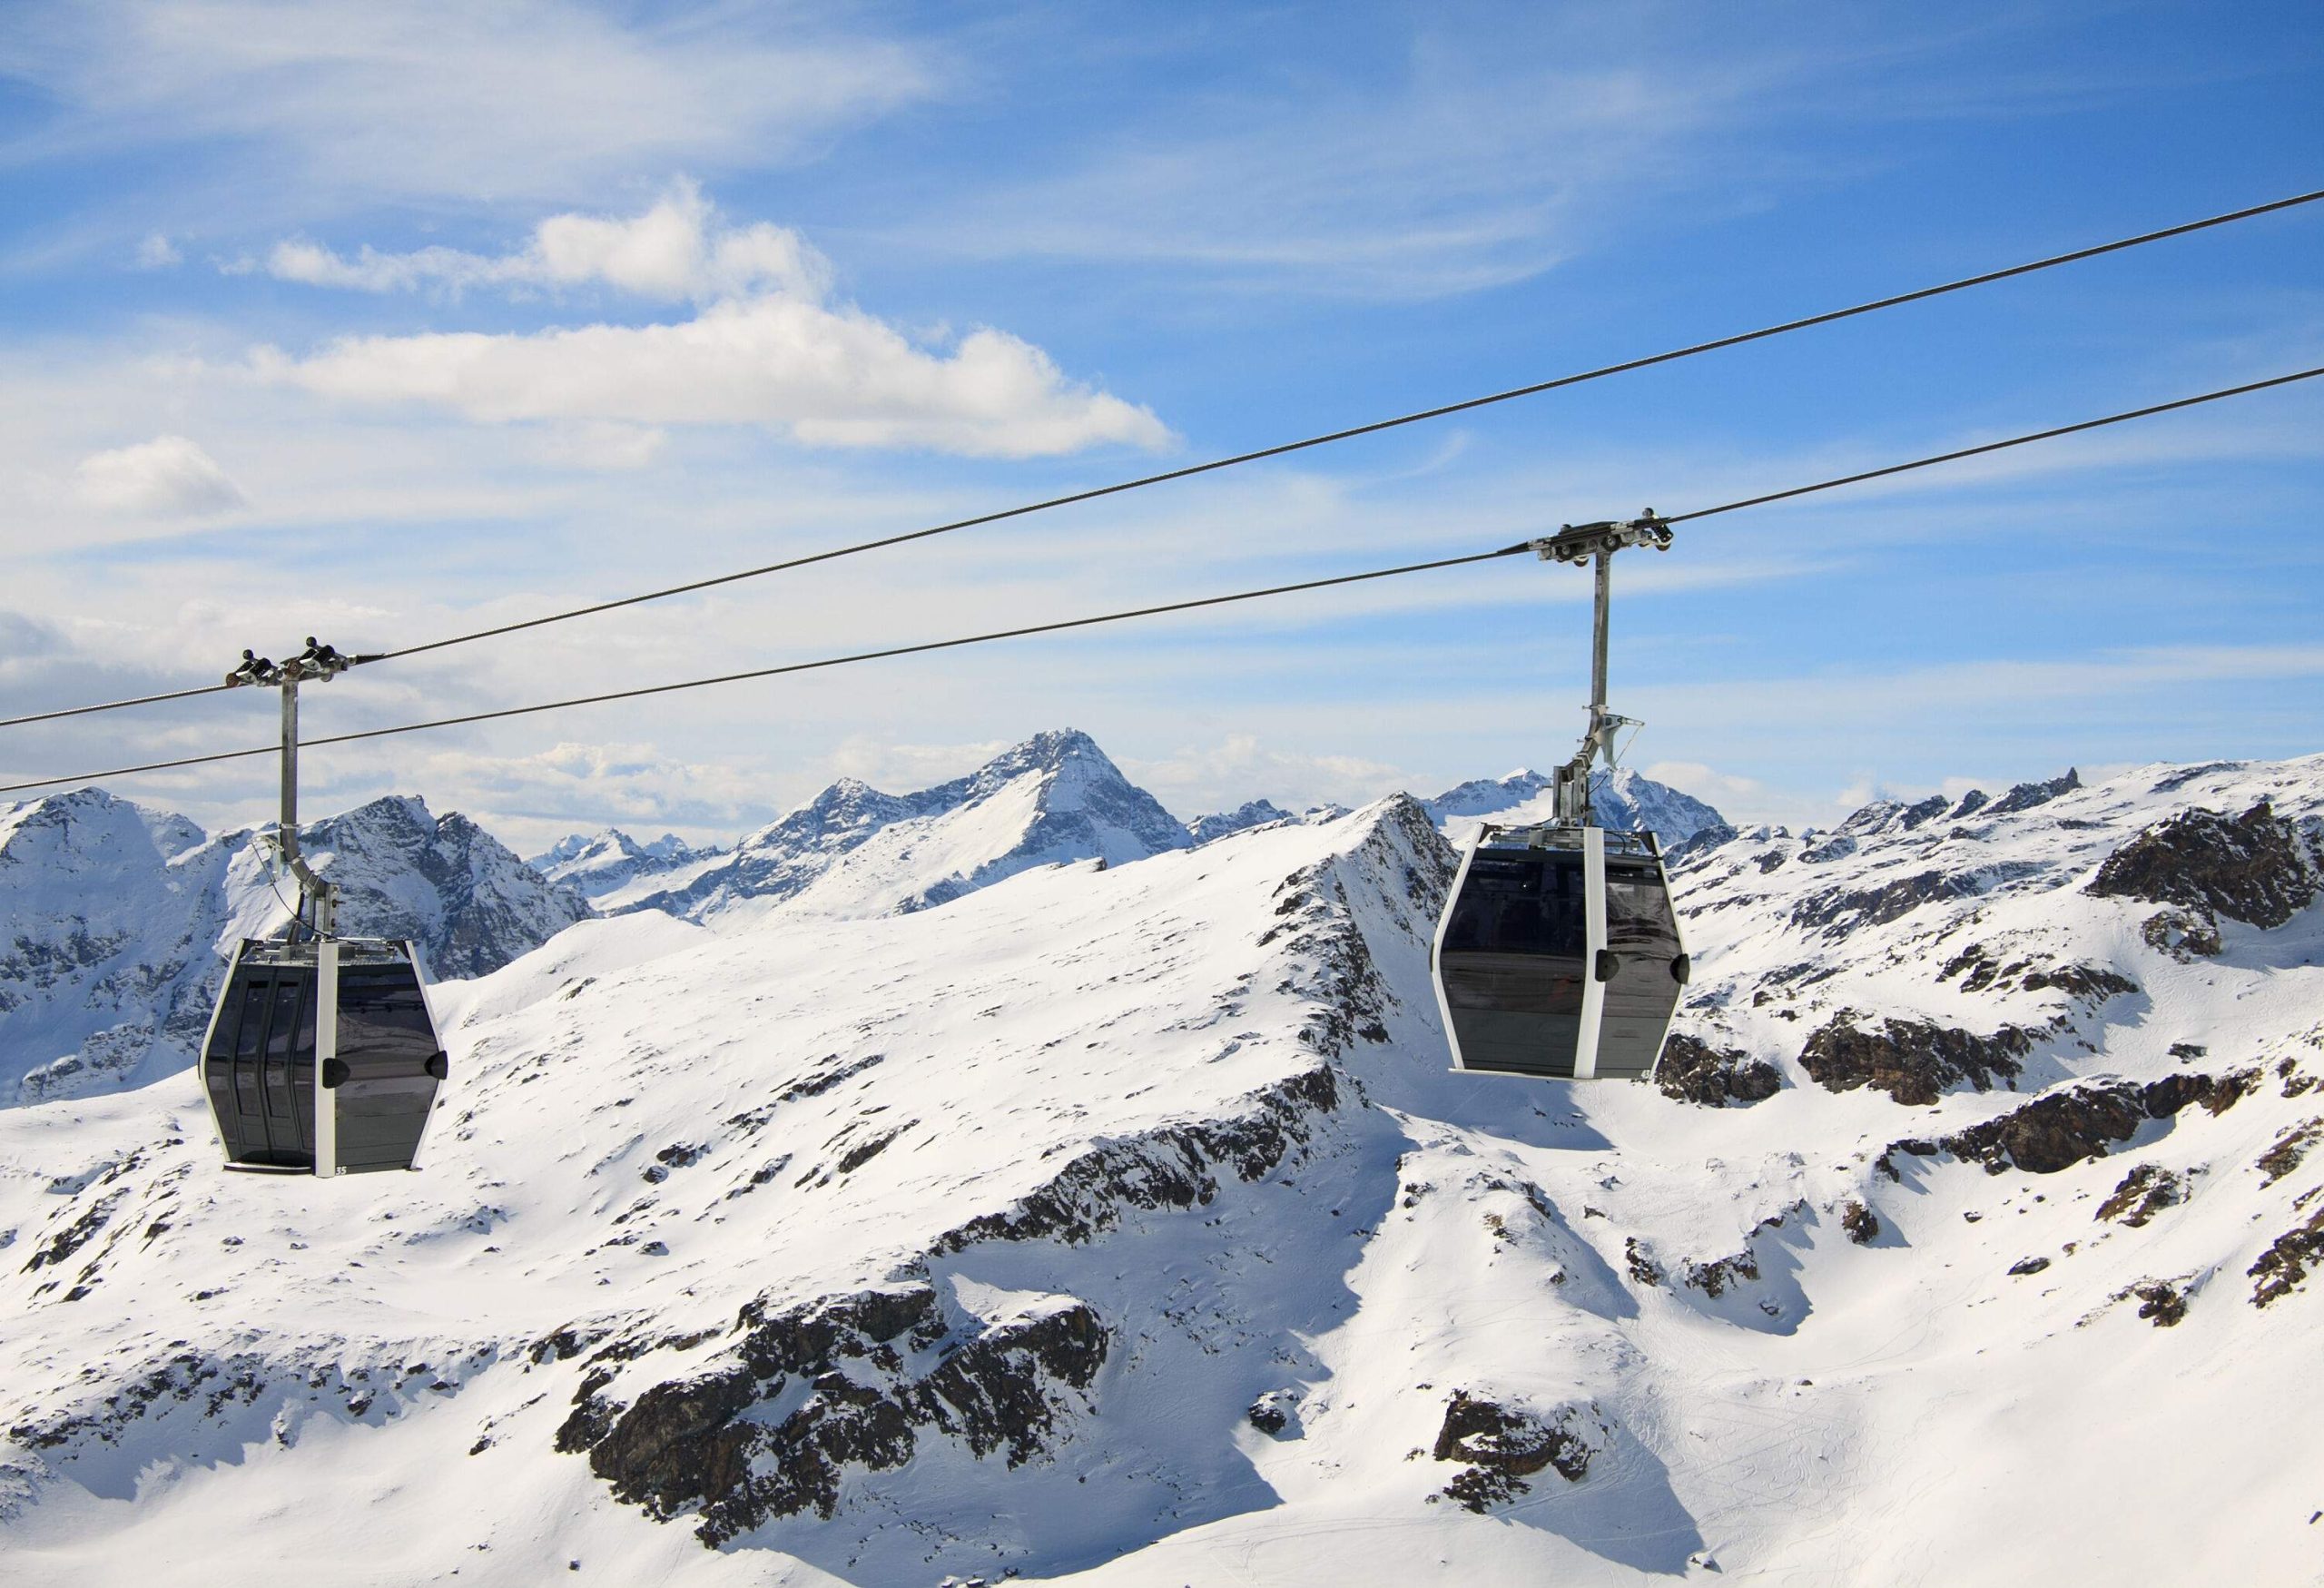 Two cable cars hover above a snow-covered terrain.